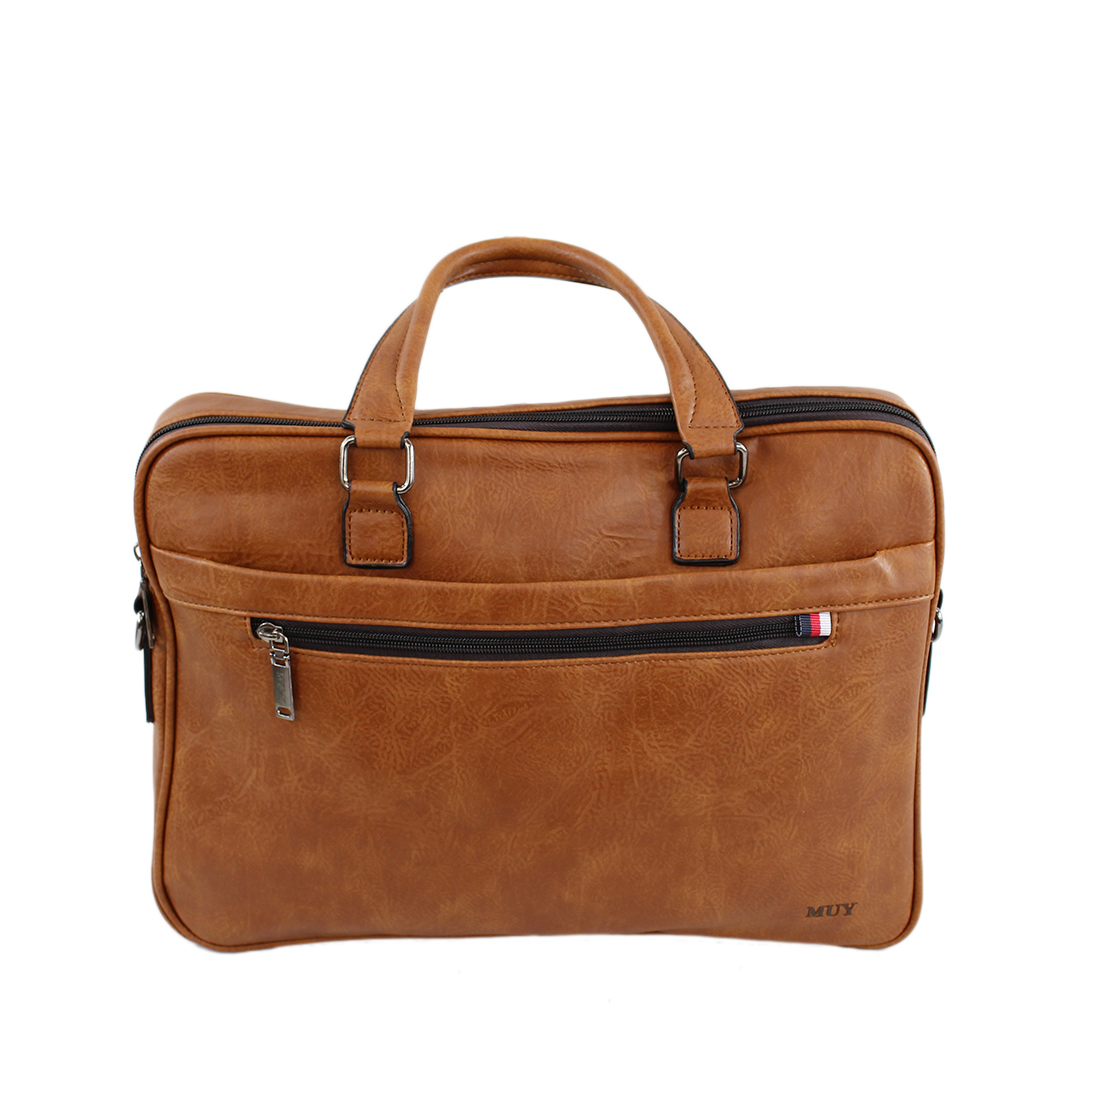 Classic leather briefcase laptop